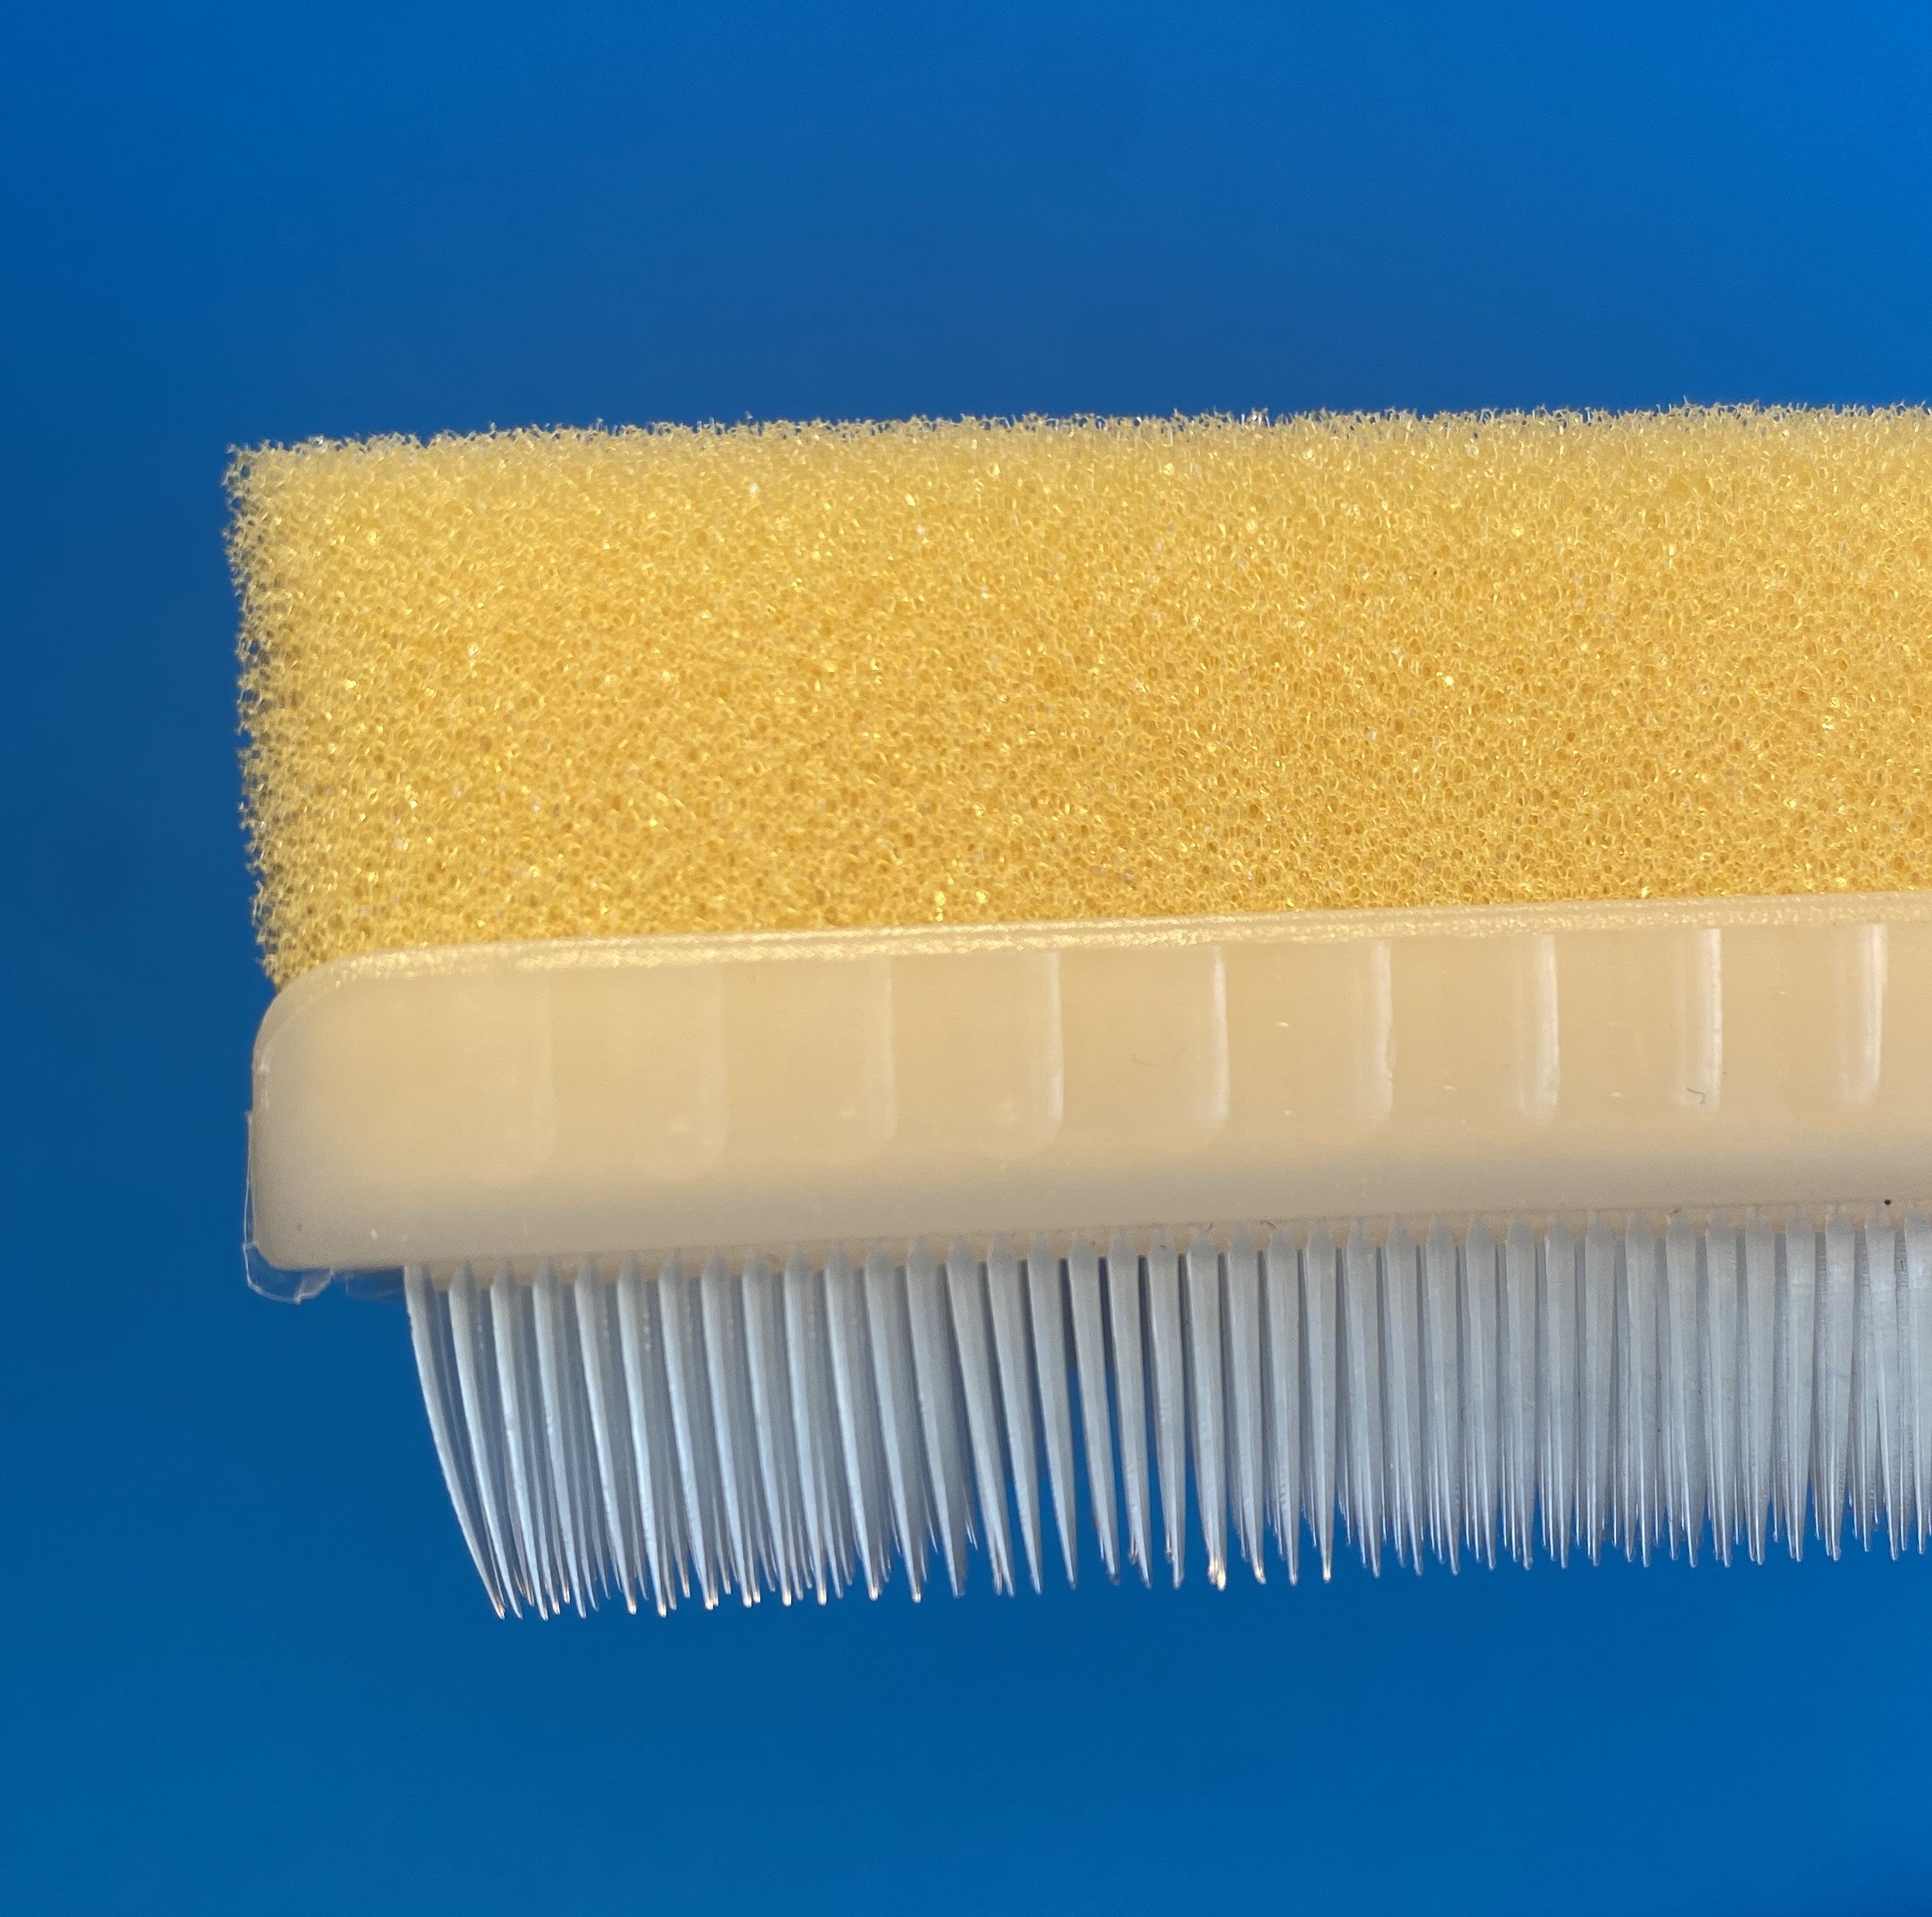 Surgical-Style Scrub Brush with Foam for Hands and Nails (box of 525 p